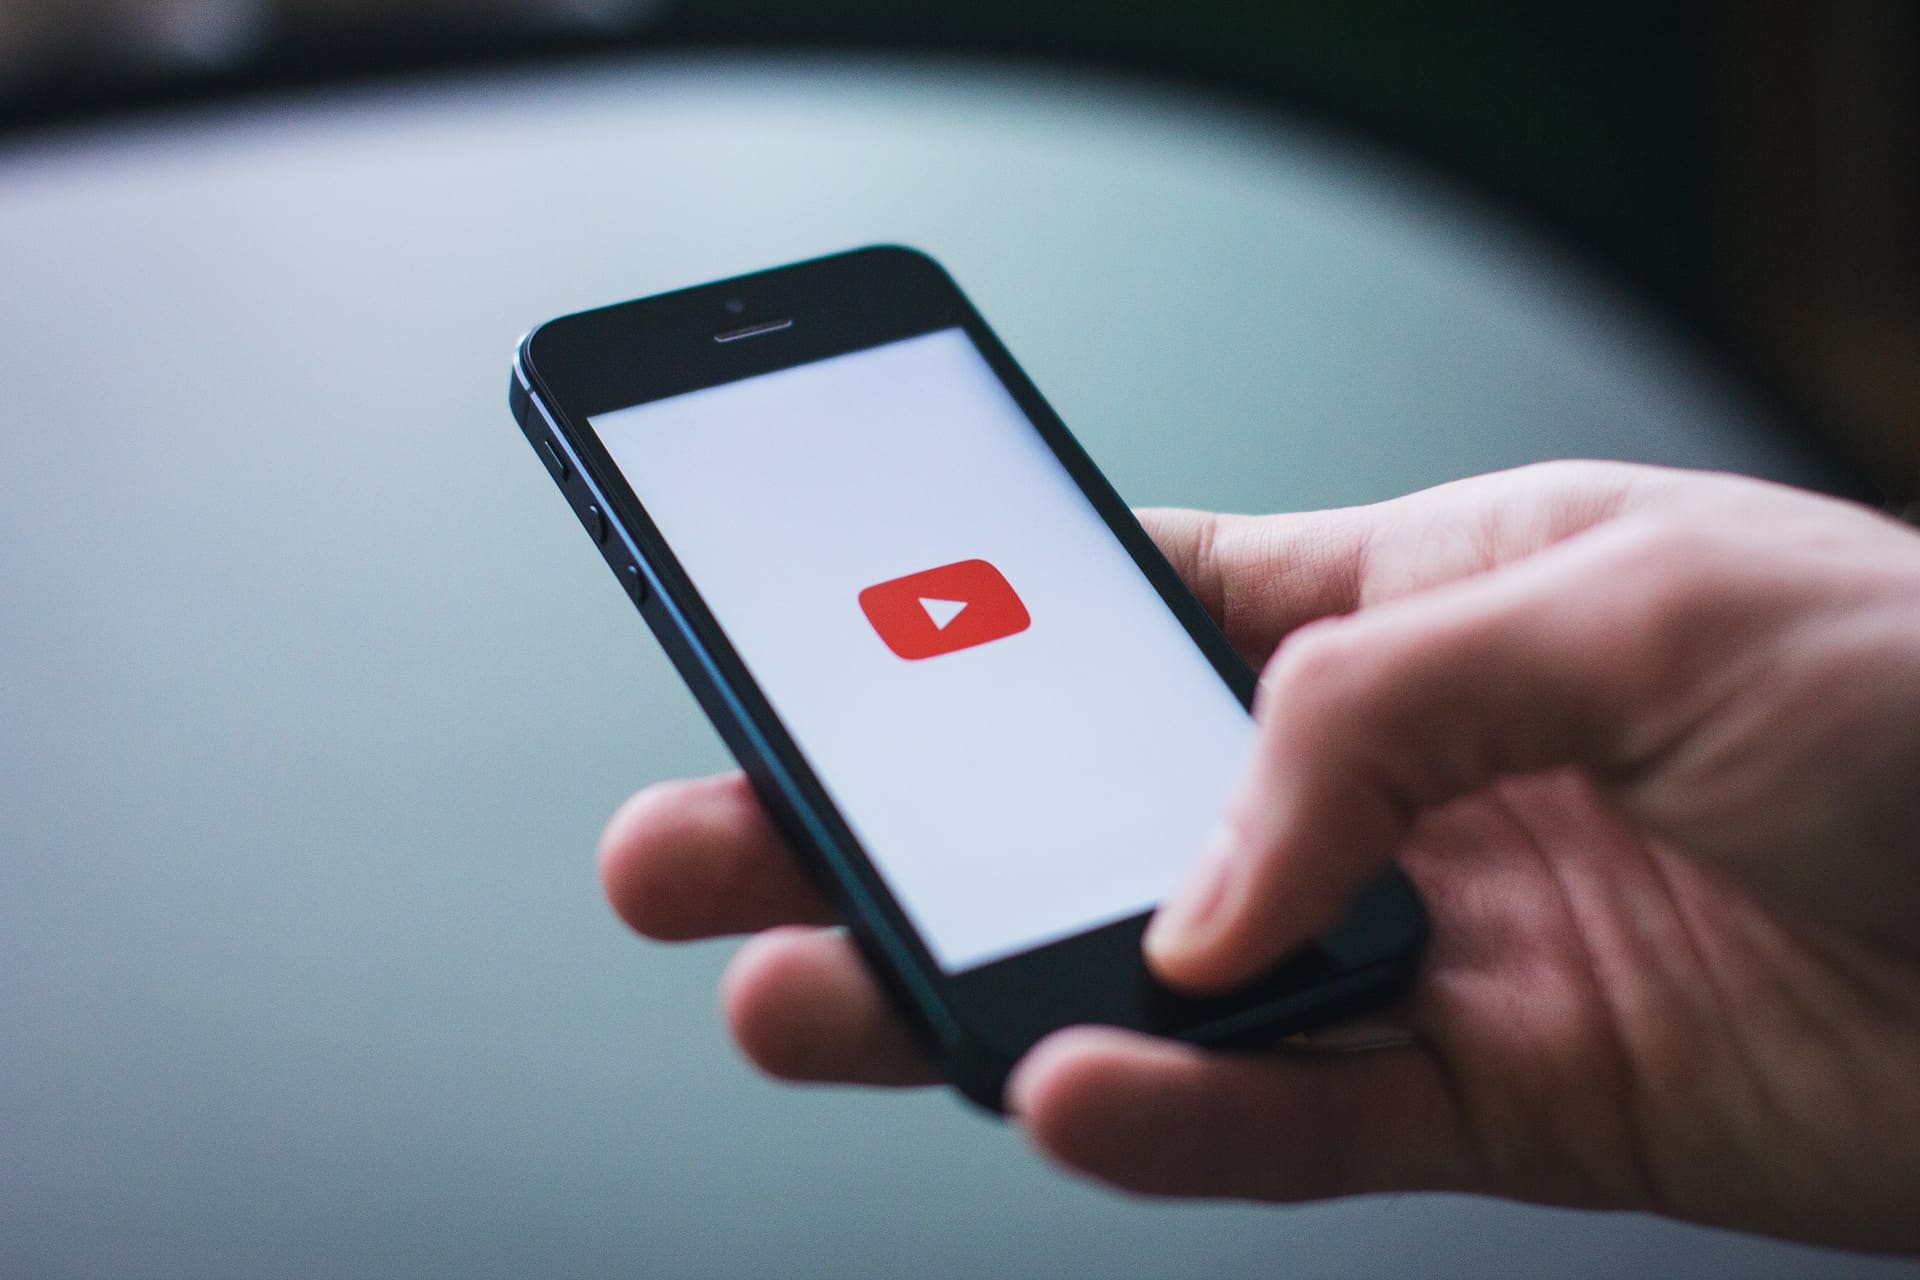 How To Start Making Videos to Grow Your Business